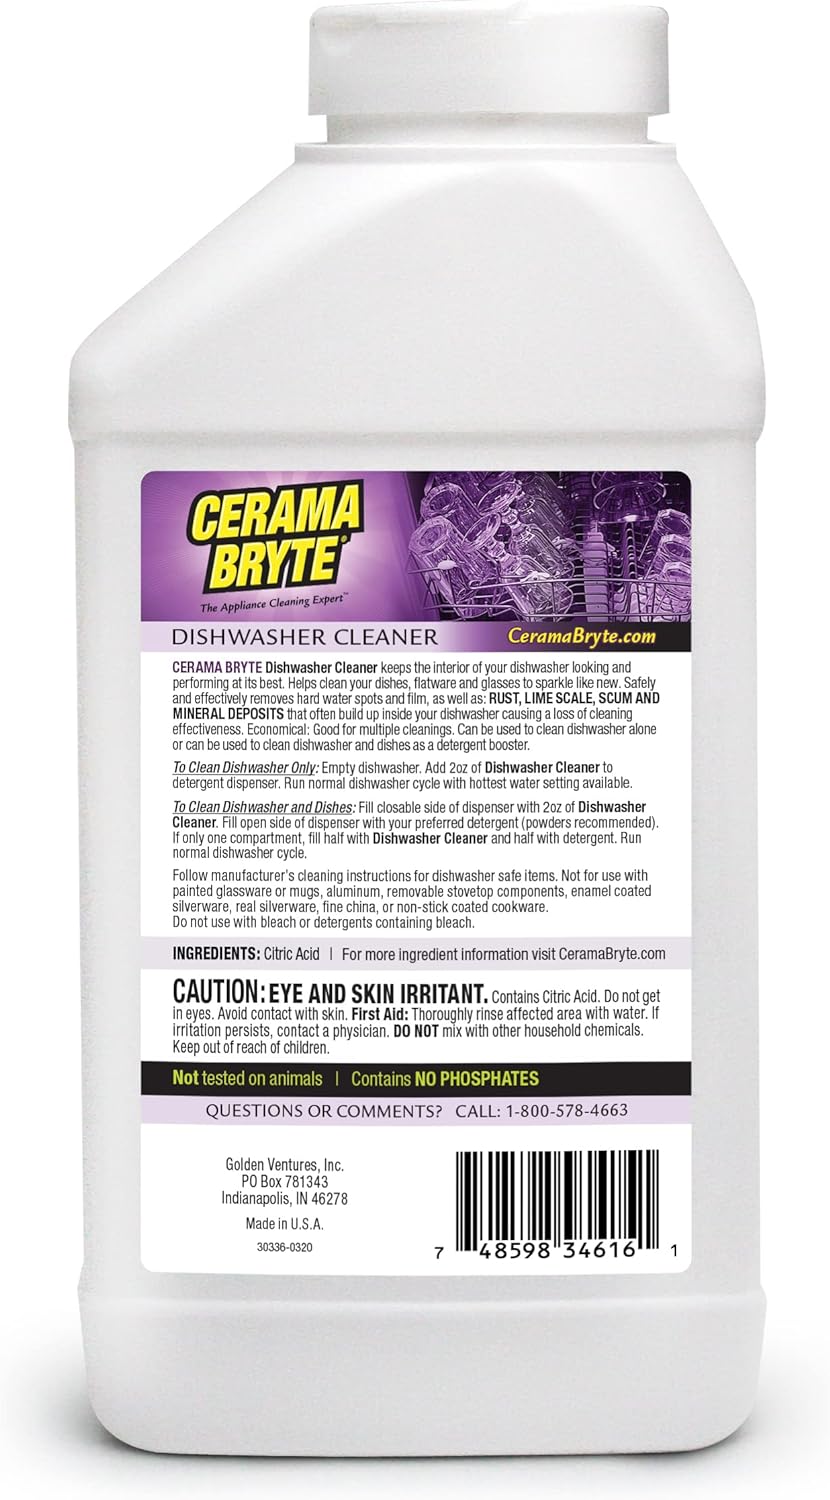 Cerama Bryte Dishwasher Cleaner, 16 Ounce (2 Count), Powerful Interior Cleaner, Remove Cloudy Film, Daily Use, Removes Lime Scale and More : Health & Household